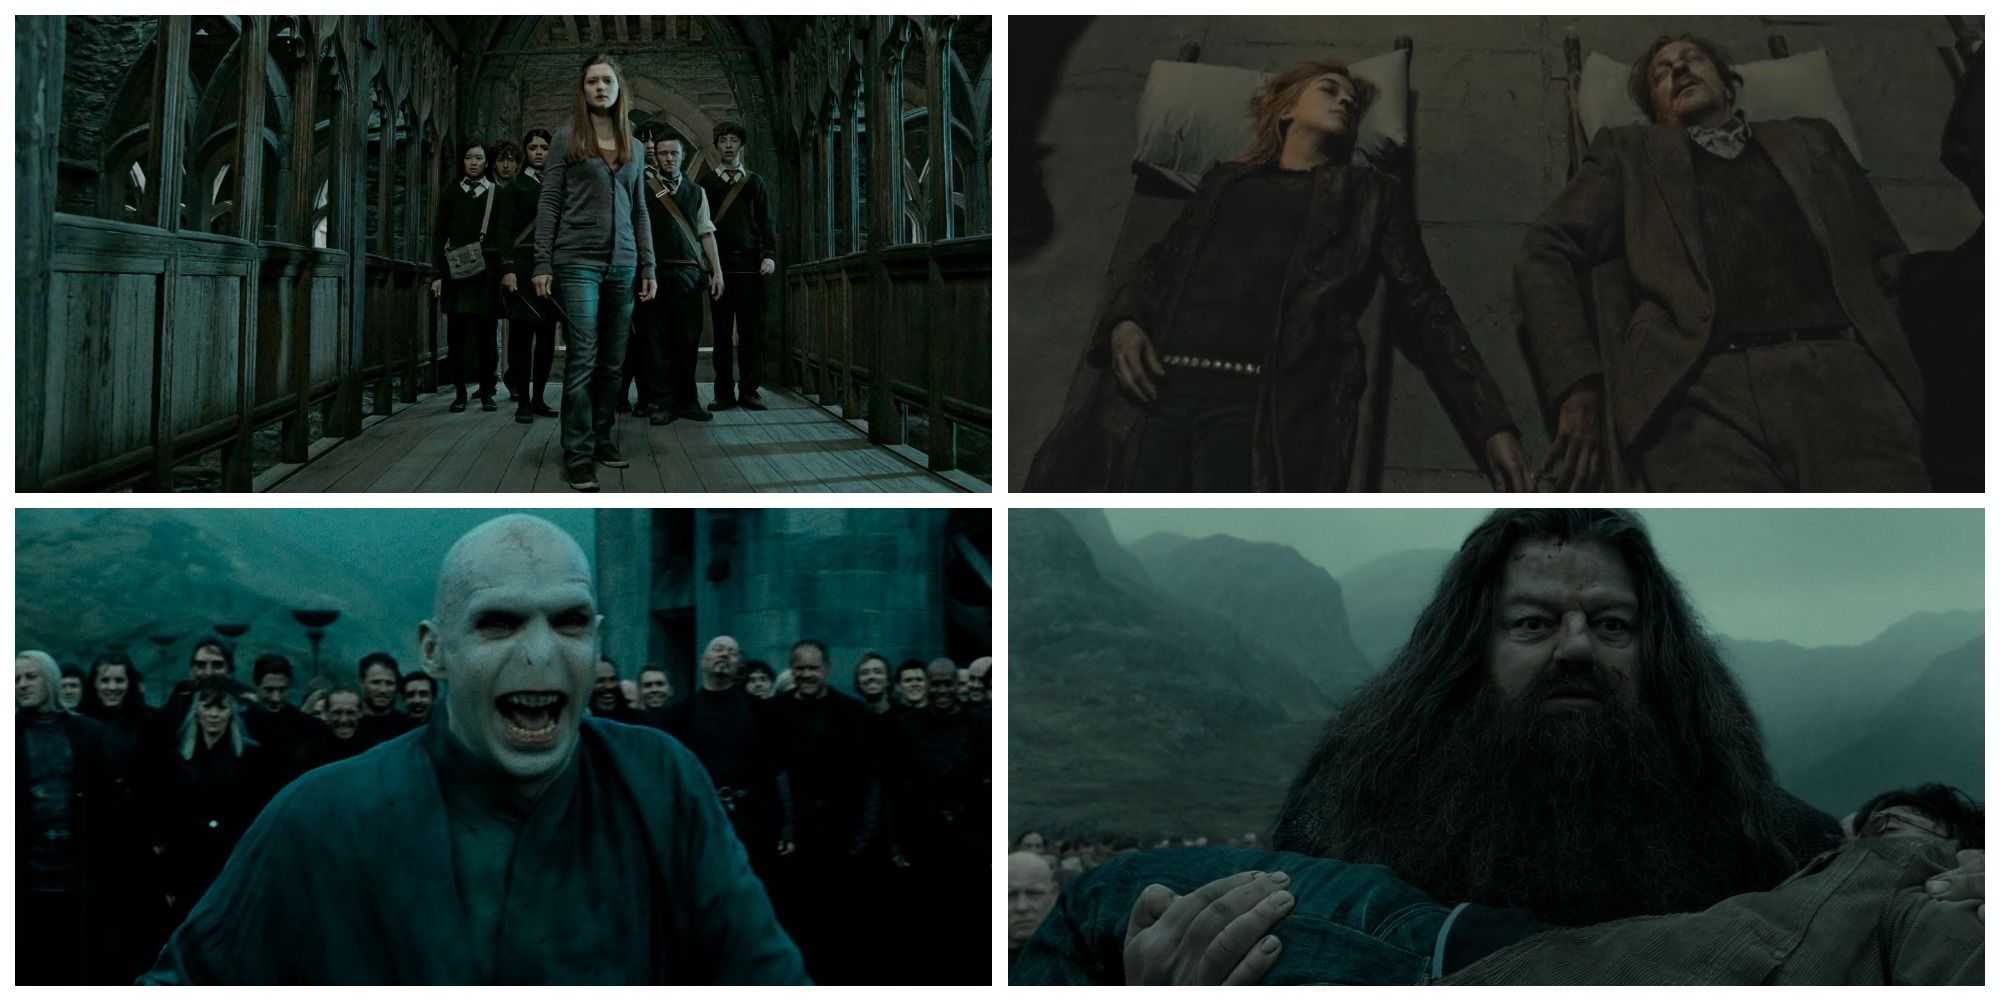 Memebase - Harry Potter And the Deathly Hallows Part 2 - All Your